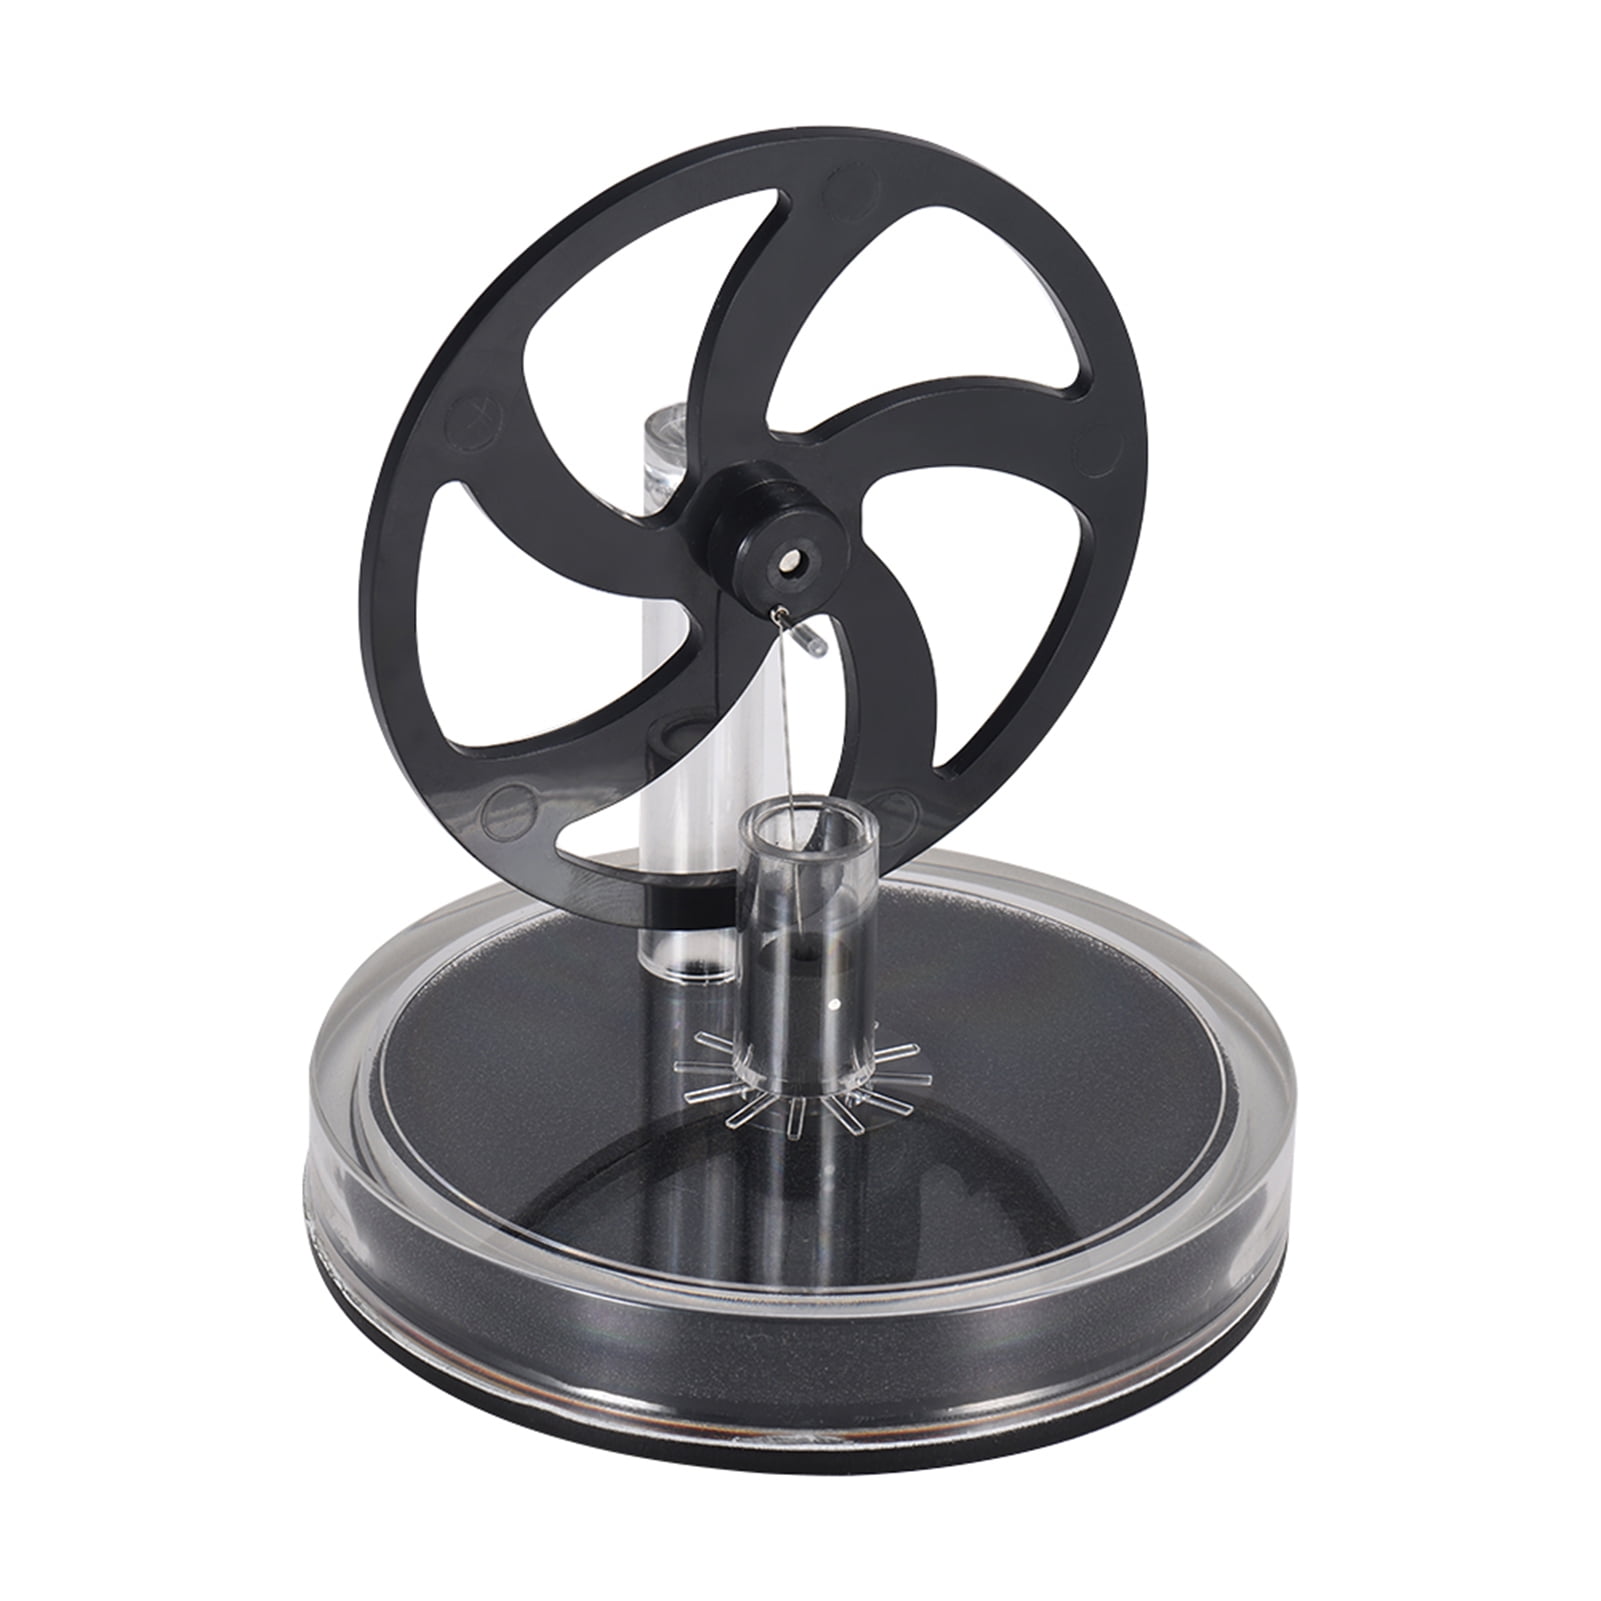 Low Temperature Stirling Engine Steam Heat Physic Educational Model Accessories